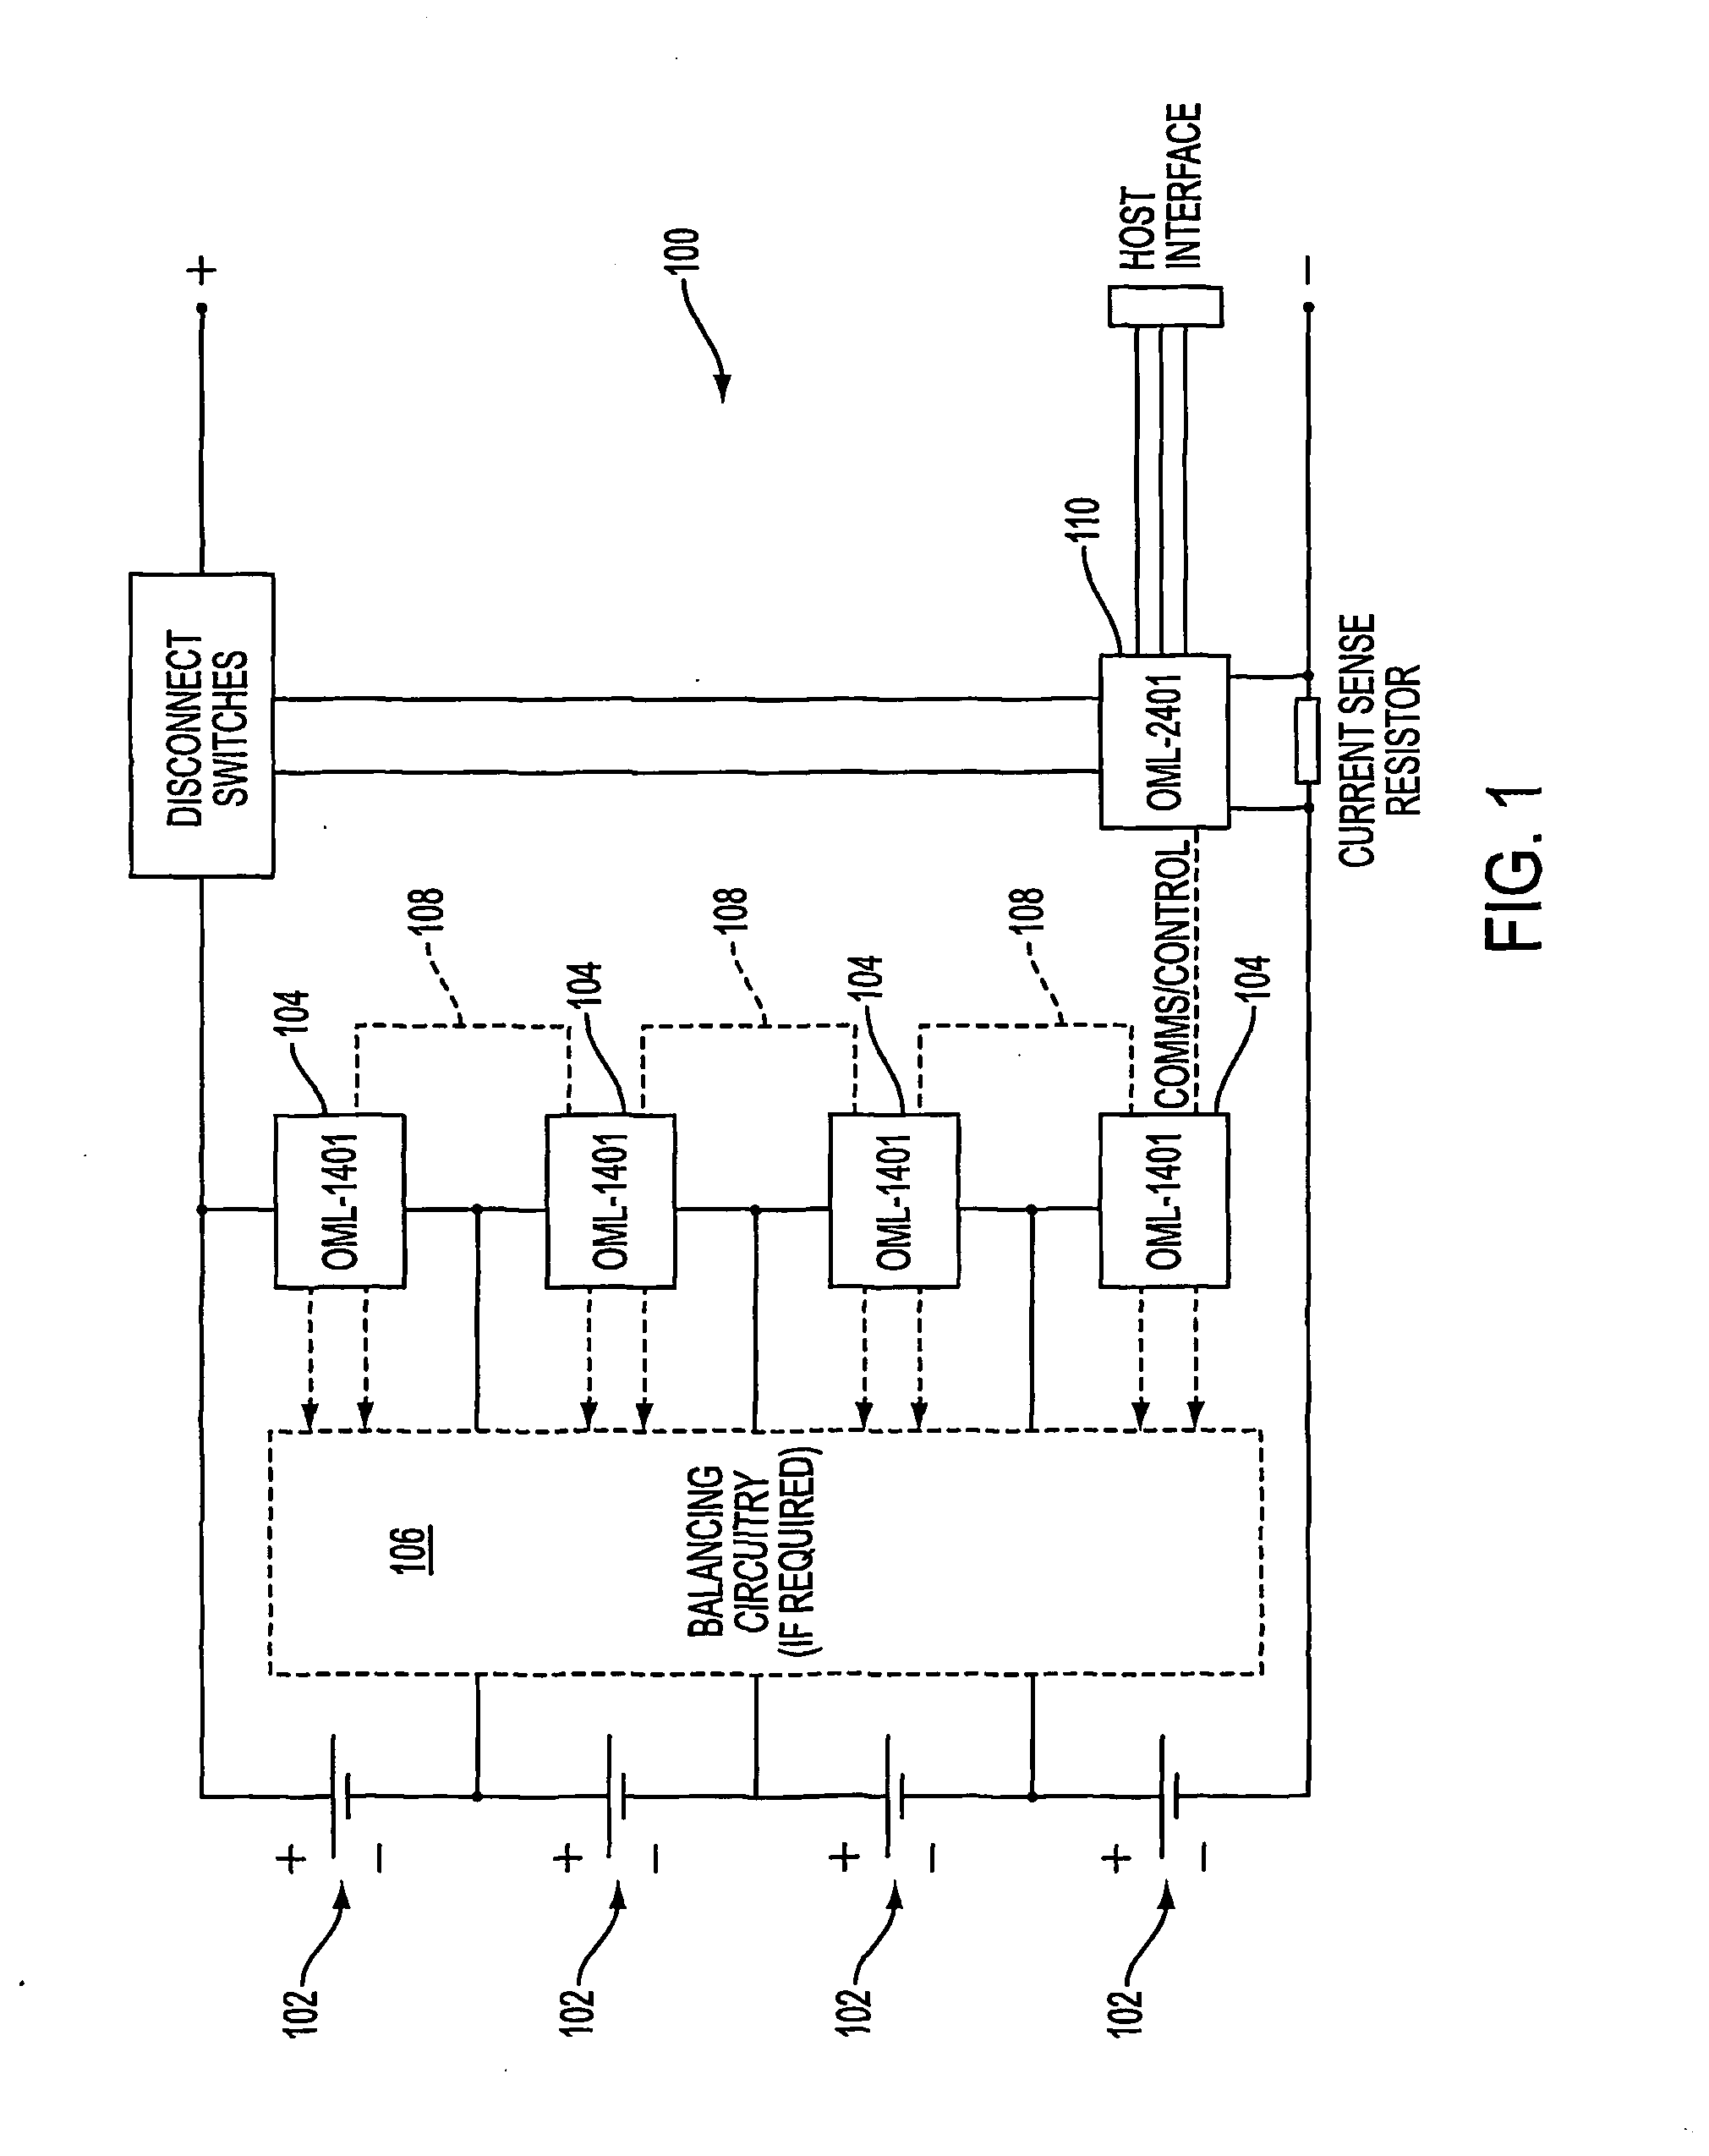 Method and apparatus for managing energy in plural energy storage units